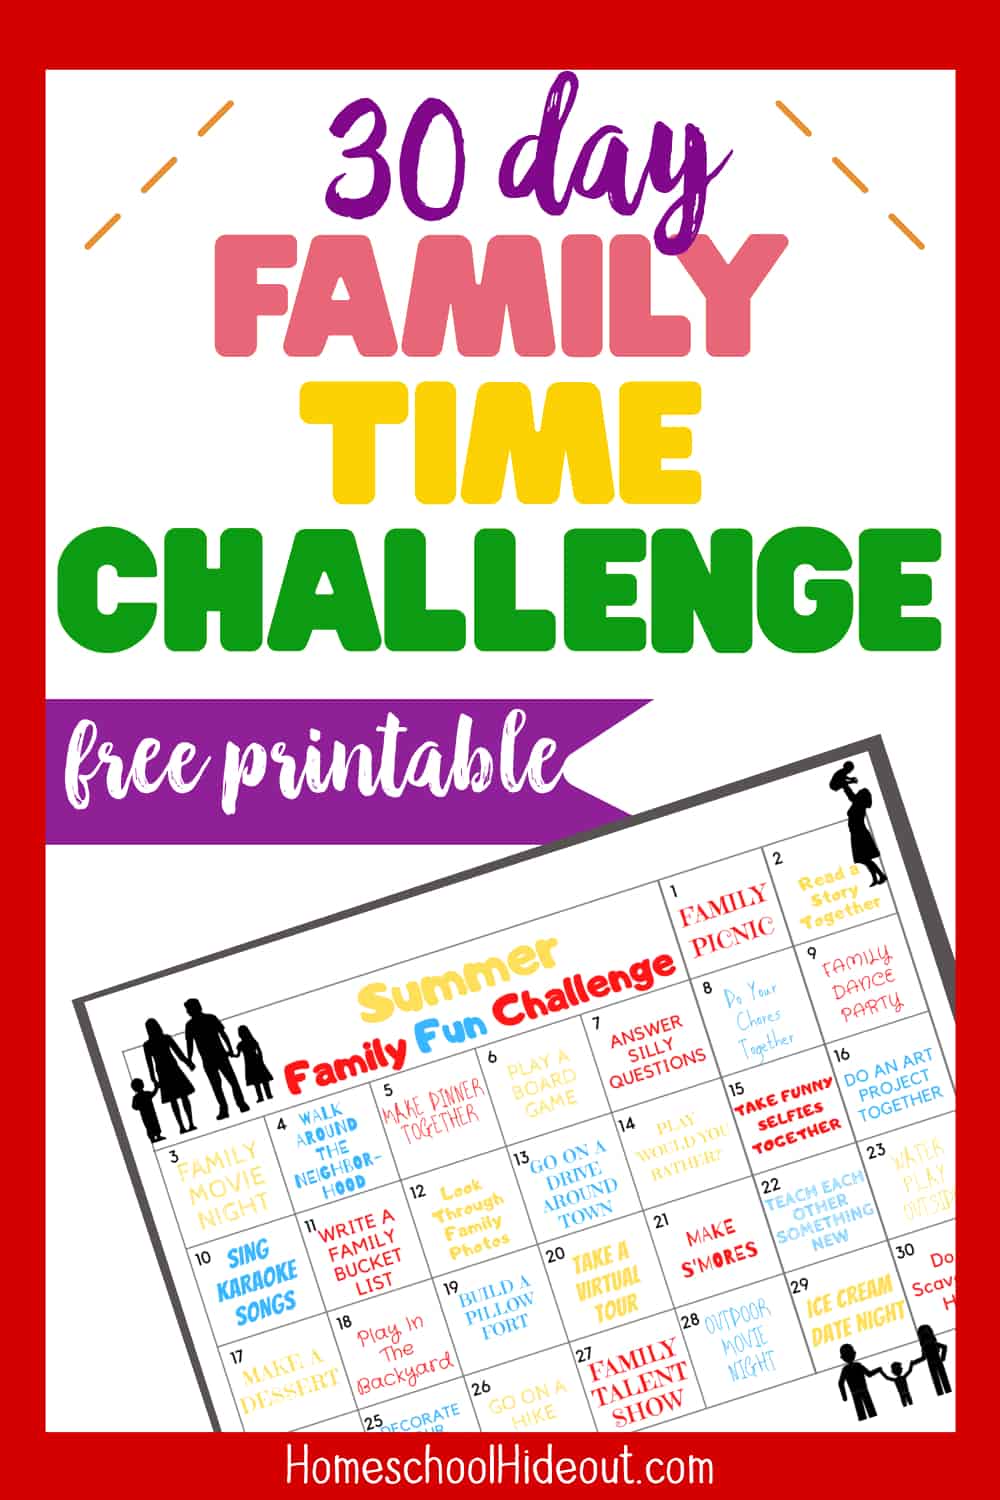 This Family Fun Challenge is JUST what we need! It's so much fun and we've enjoyed the extra family time together with the kids!